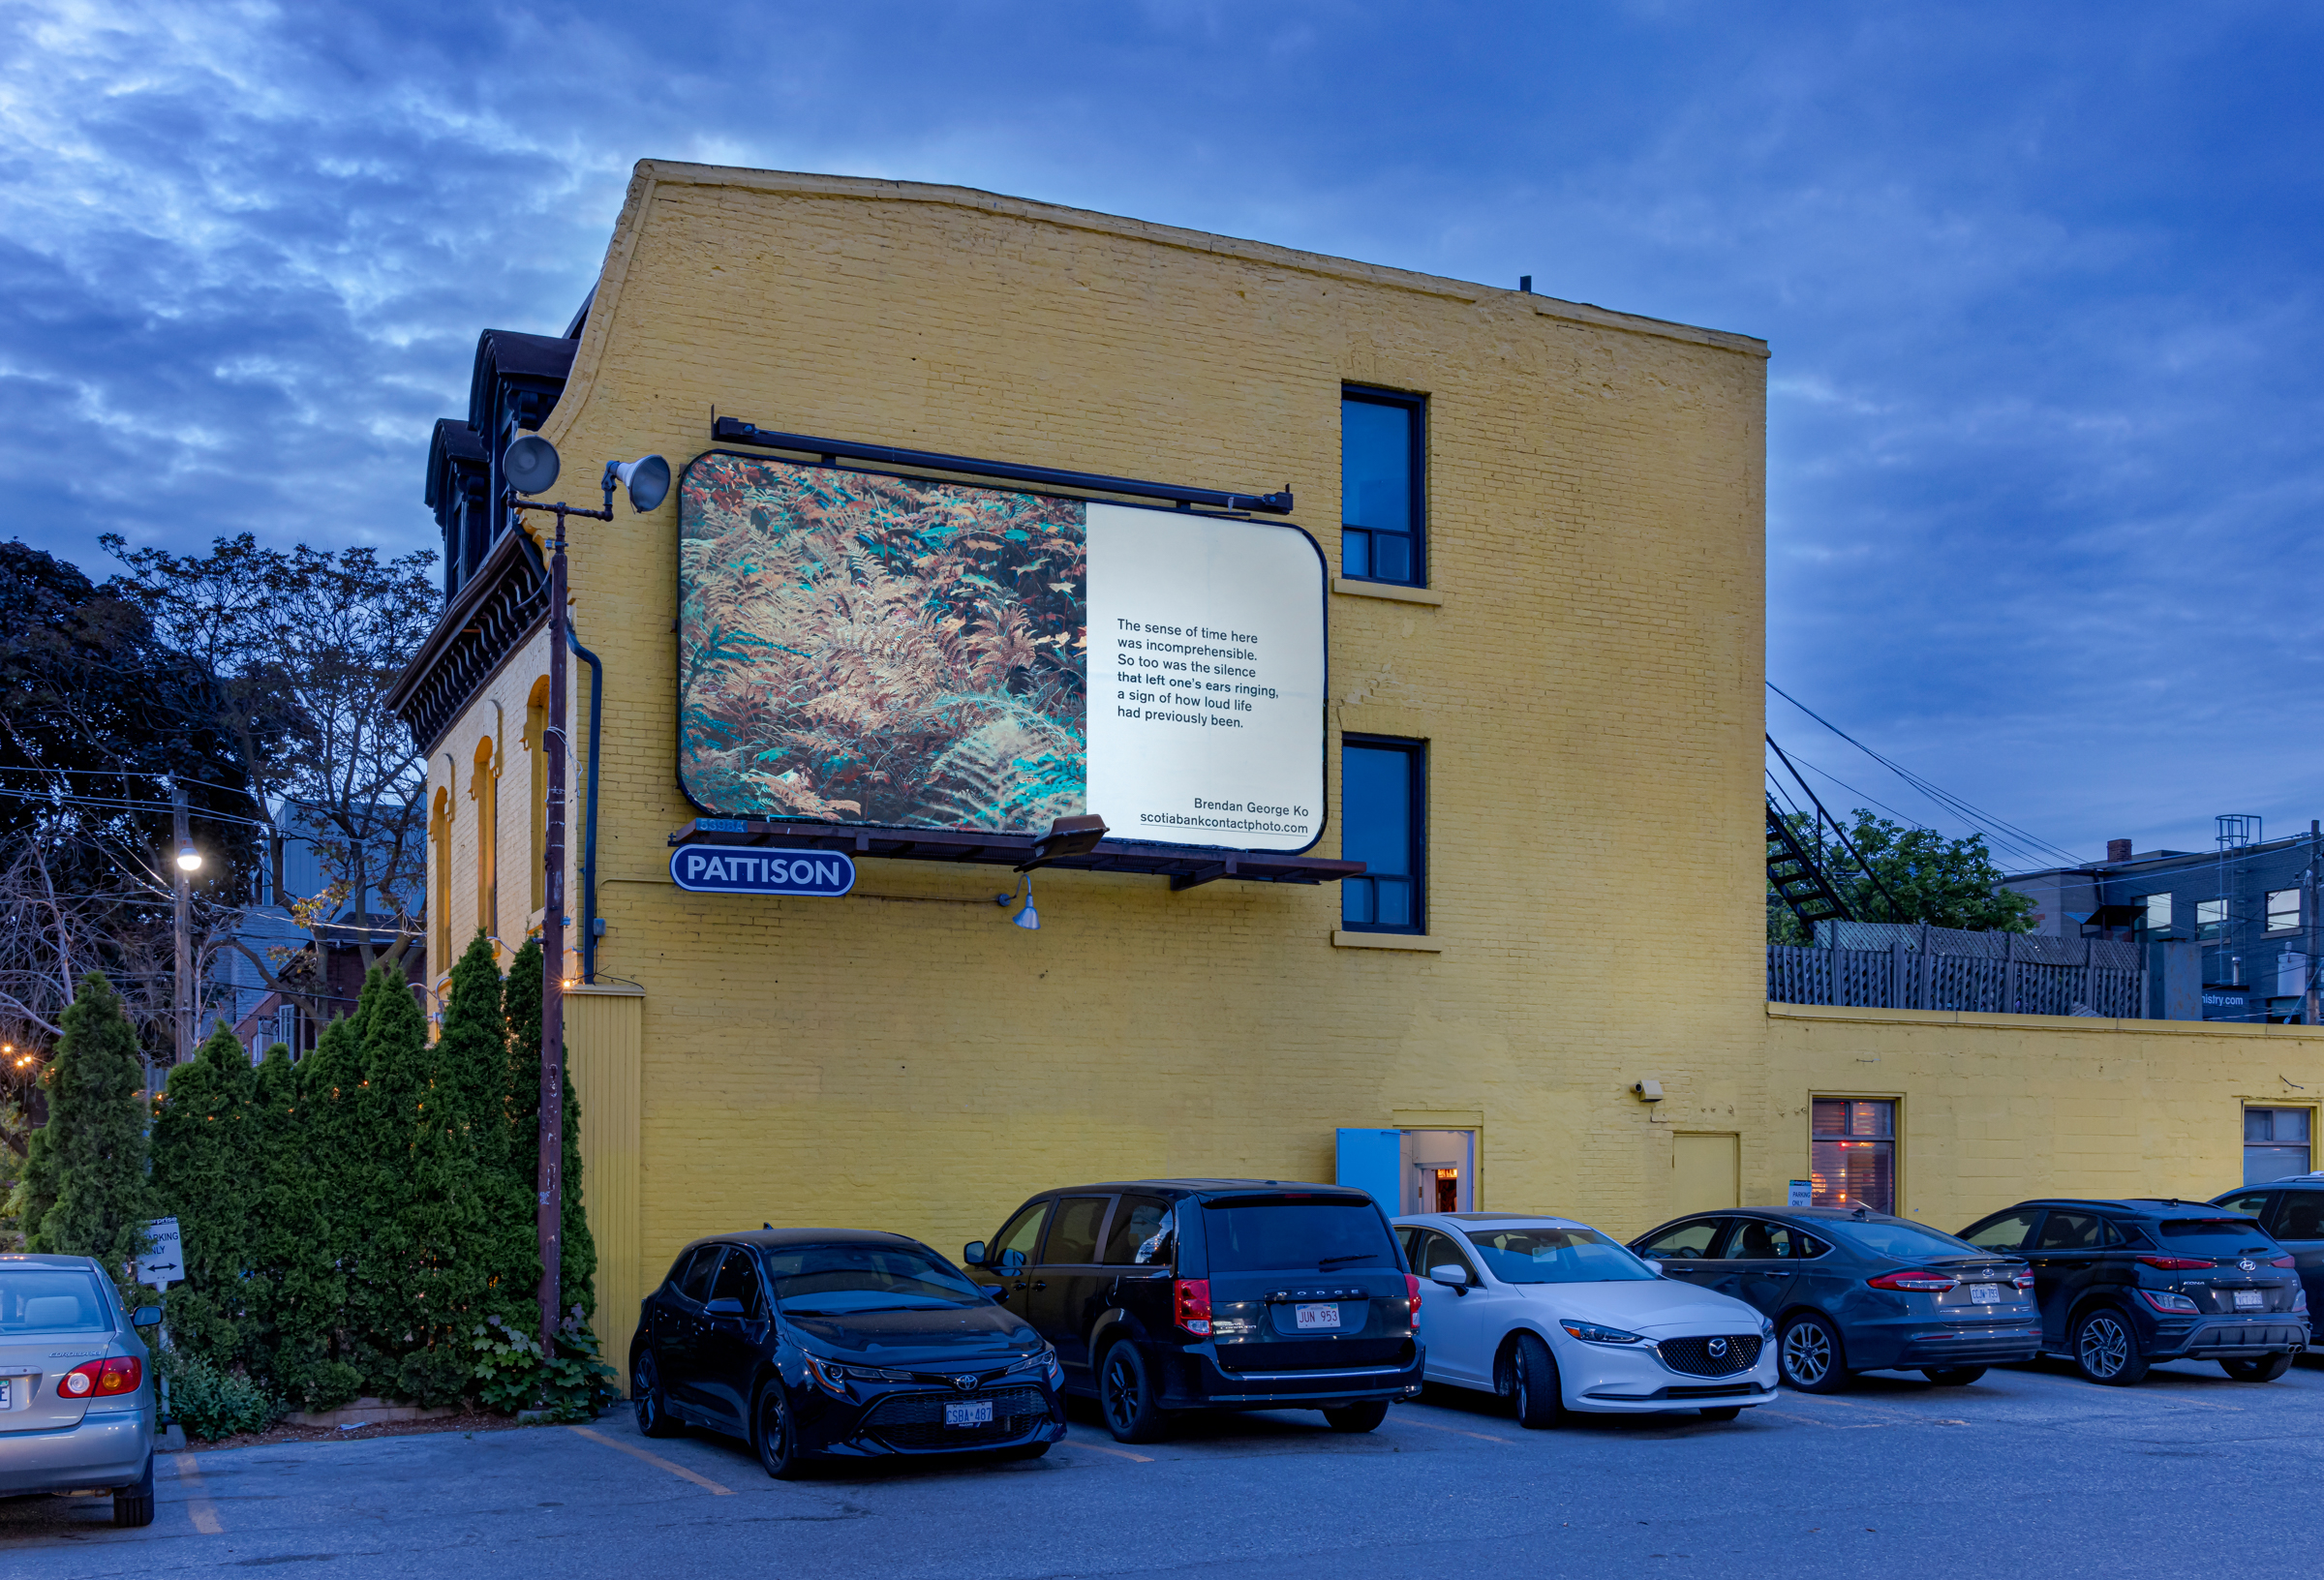     Brendan George Ko, The Forest is Wired for Wisdom, installation on billboards in Toronto and 9 other Canadian cities, 2022. Courtesy of the artist and CONTACT. Photo: Toni Hafkenscheid

